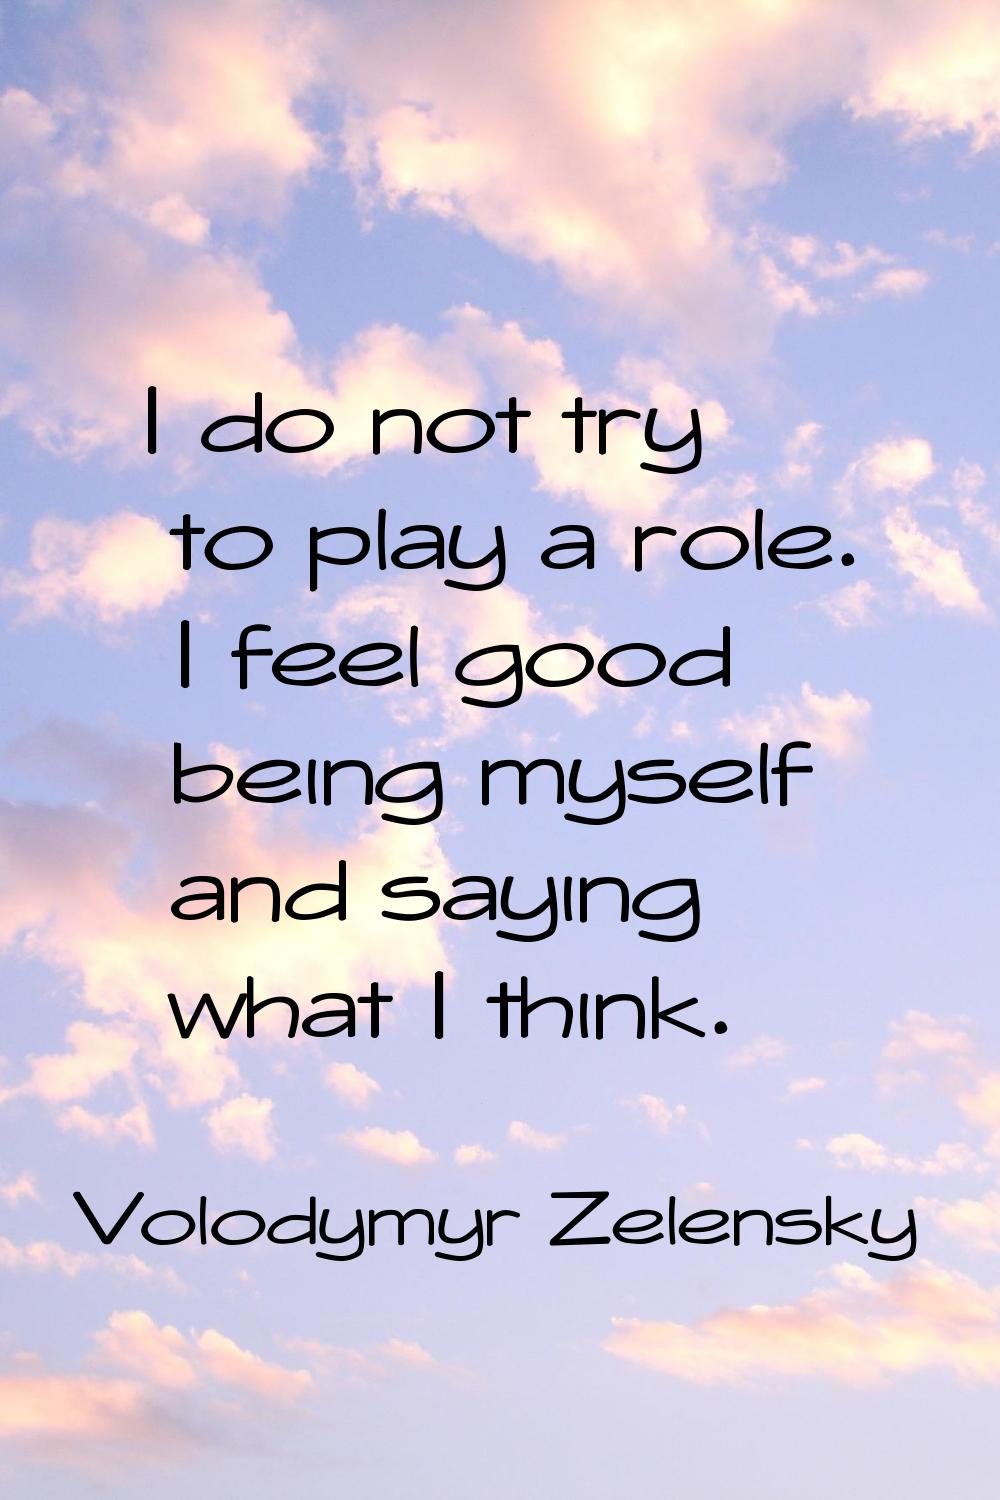 I do not try to play a role. I feel good being myself and saying what I think.